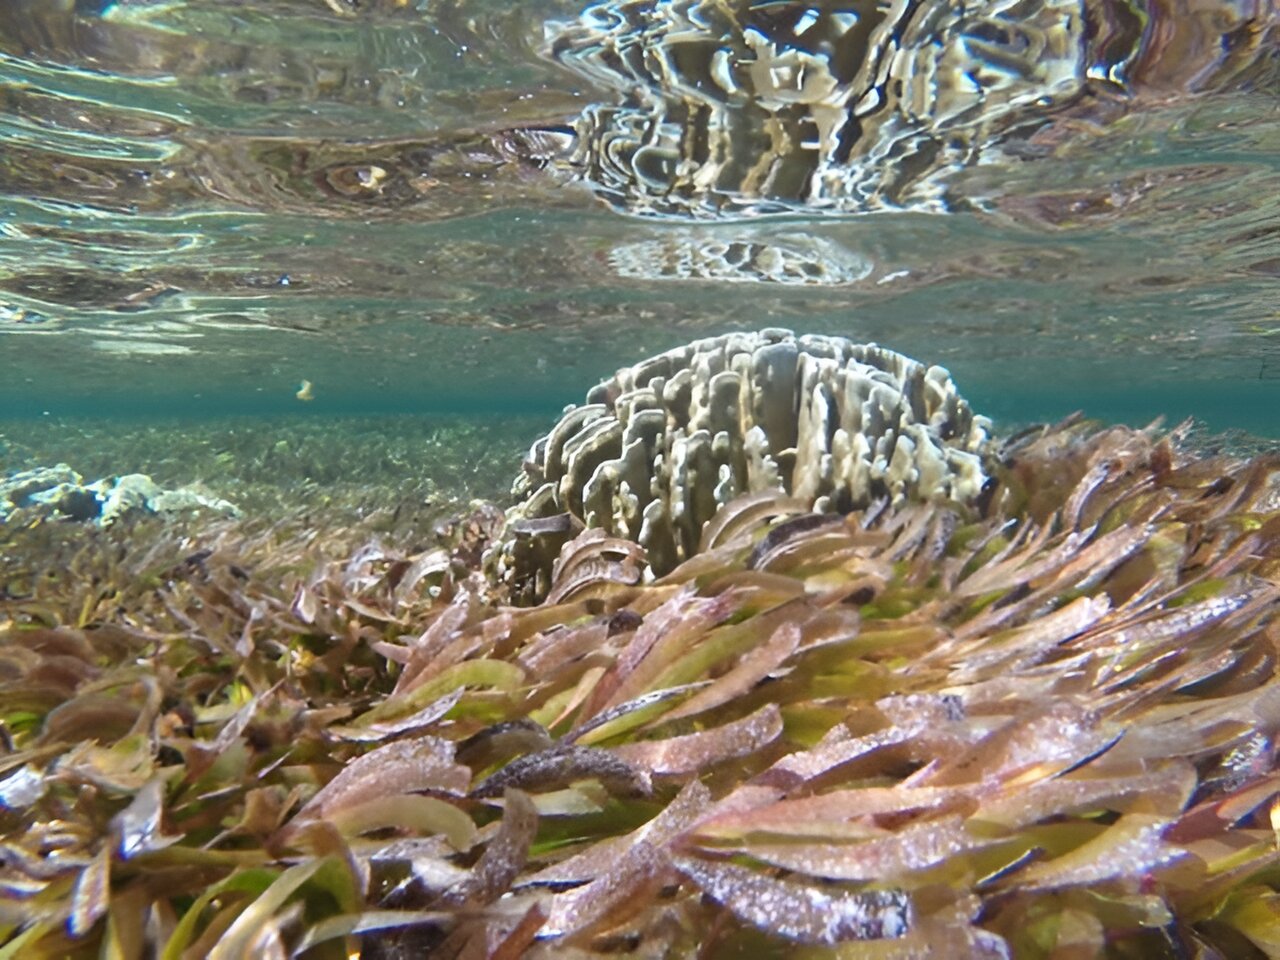 An image of a seagrass habitat